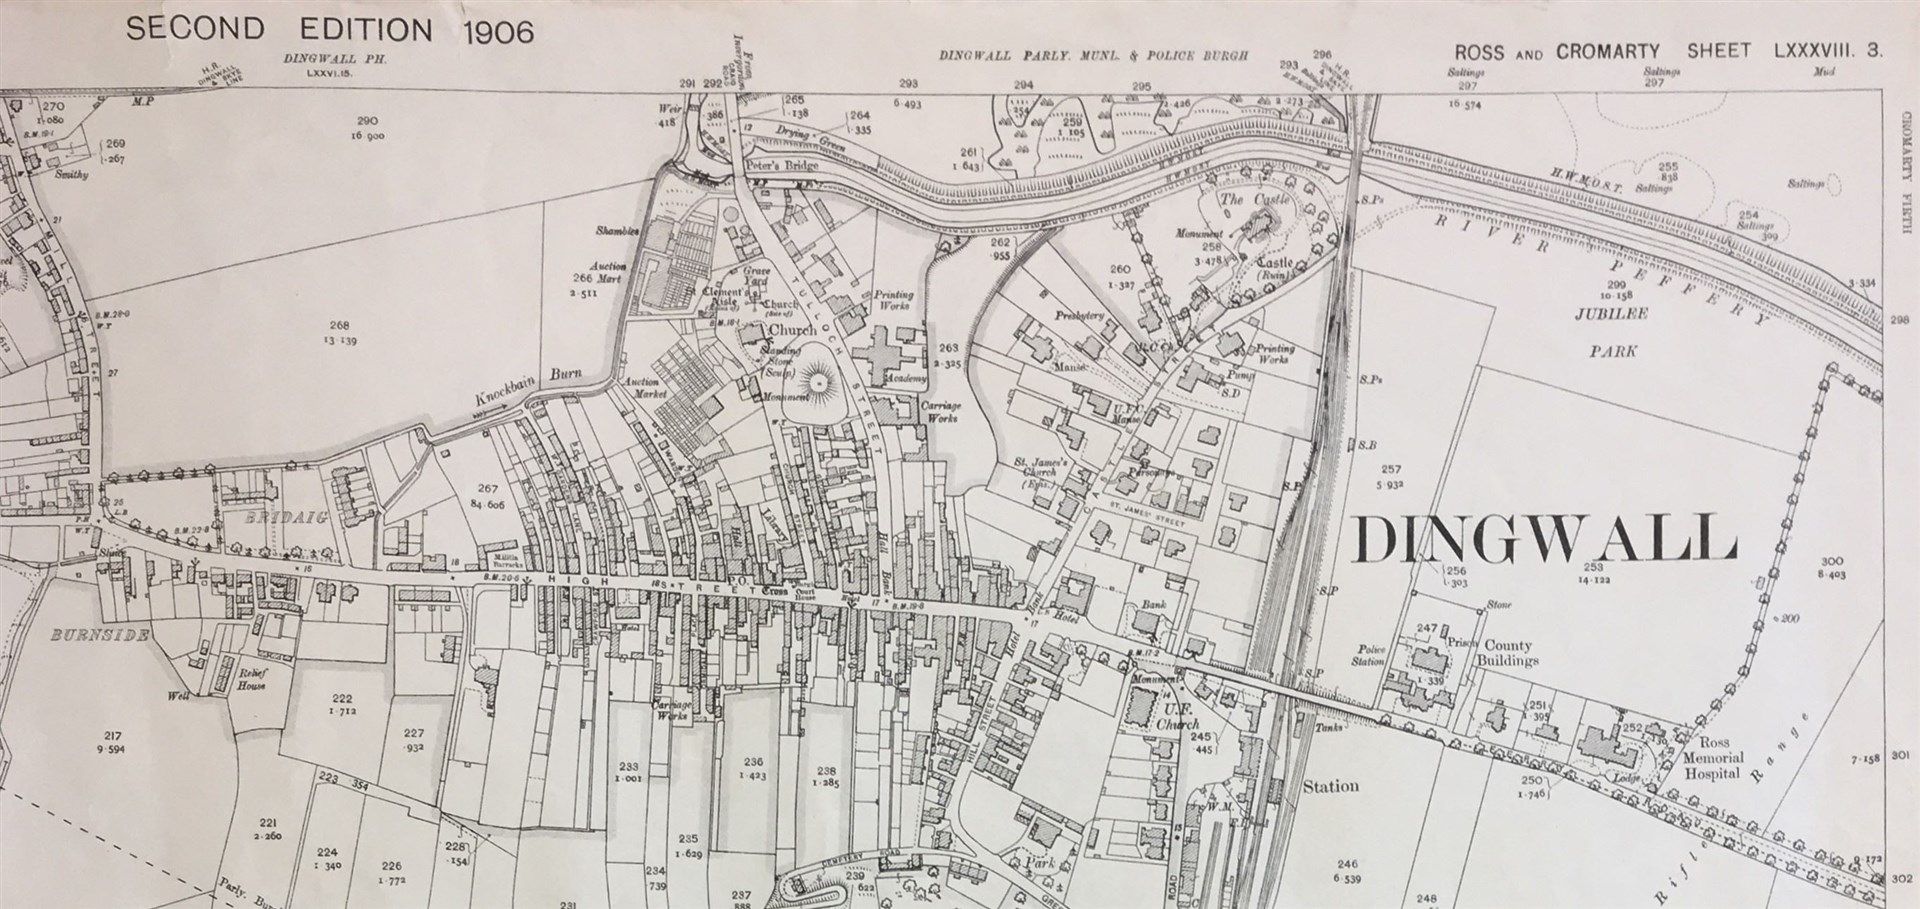 2nd edition Ordnance Survey map showing Dingwall.